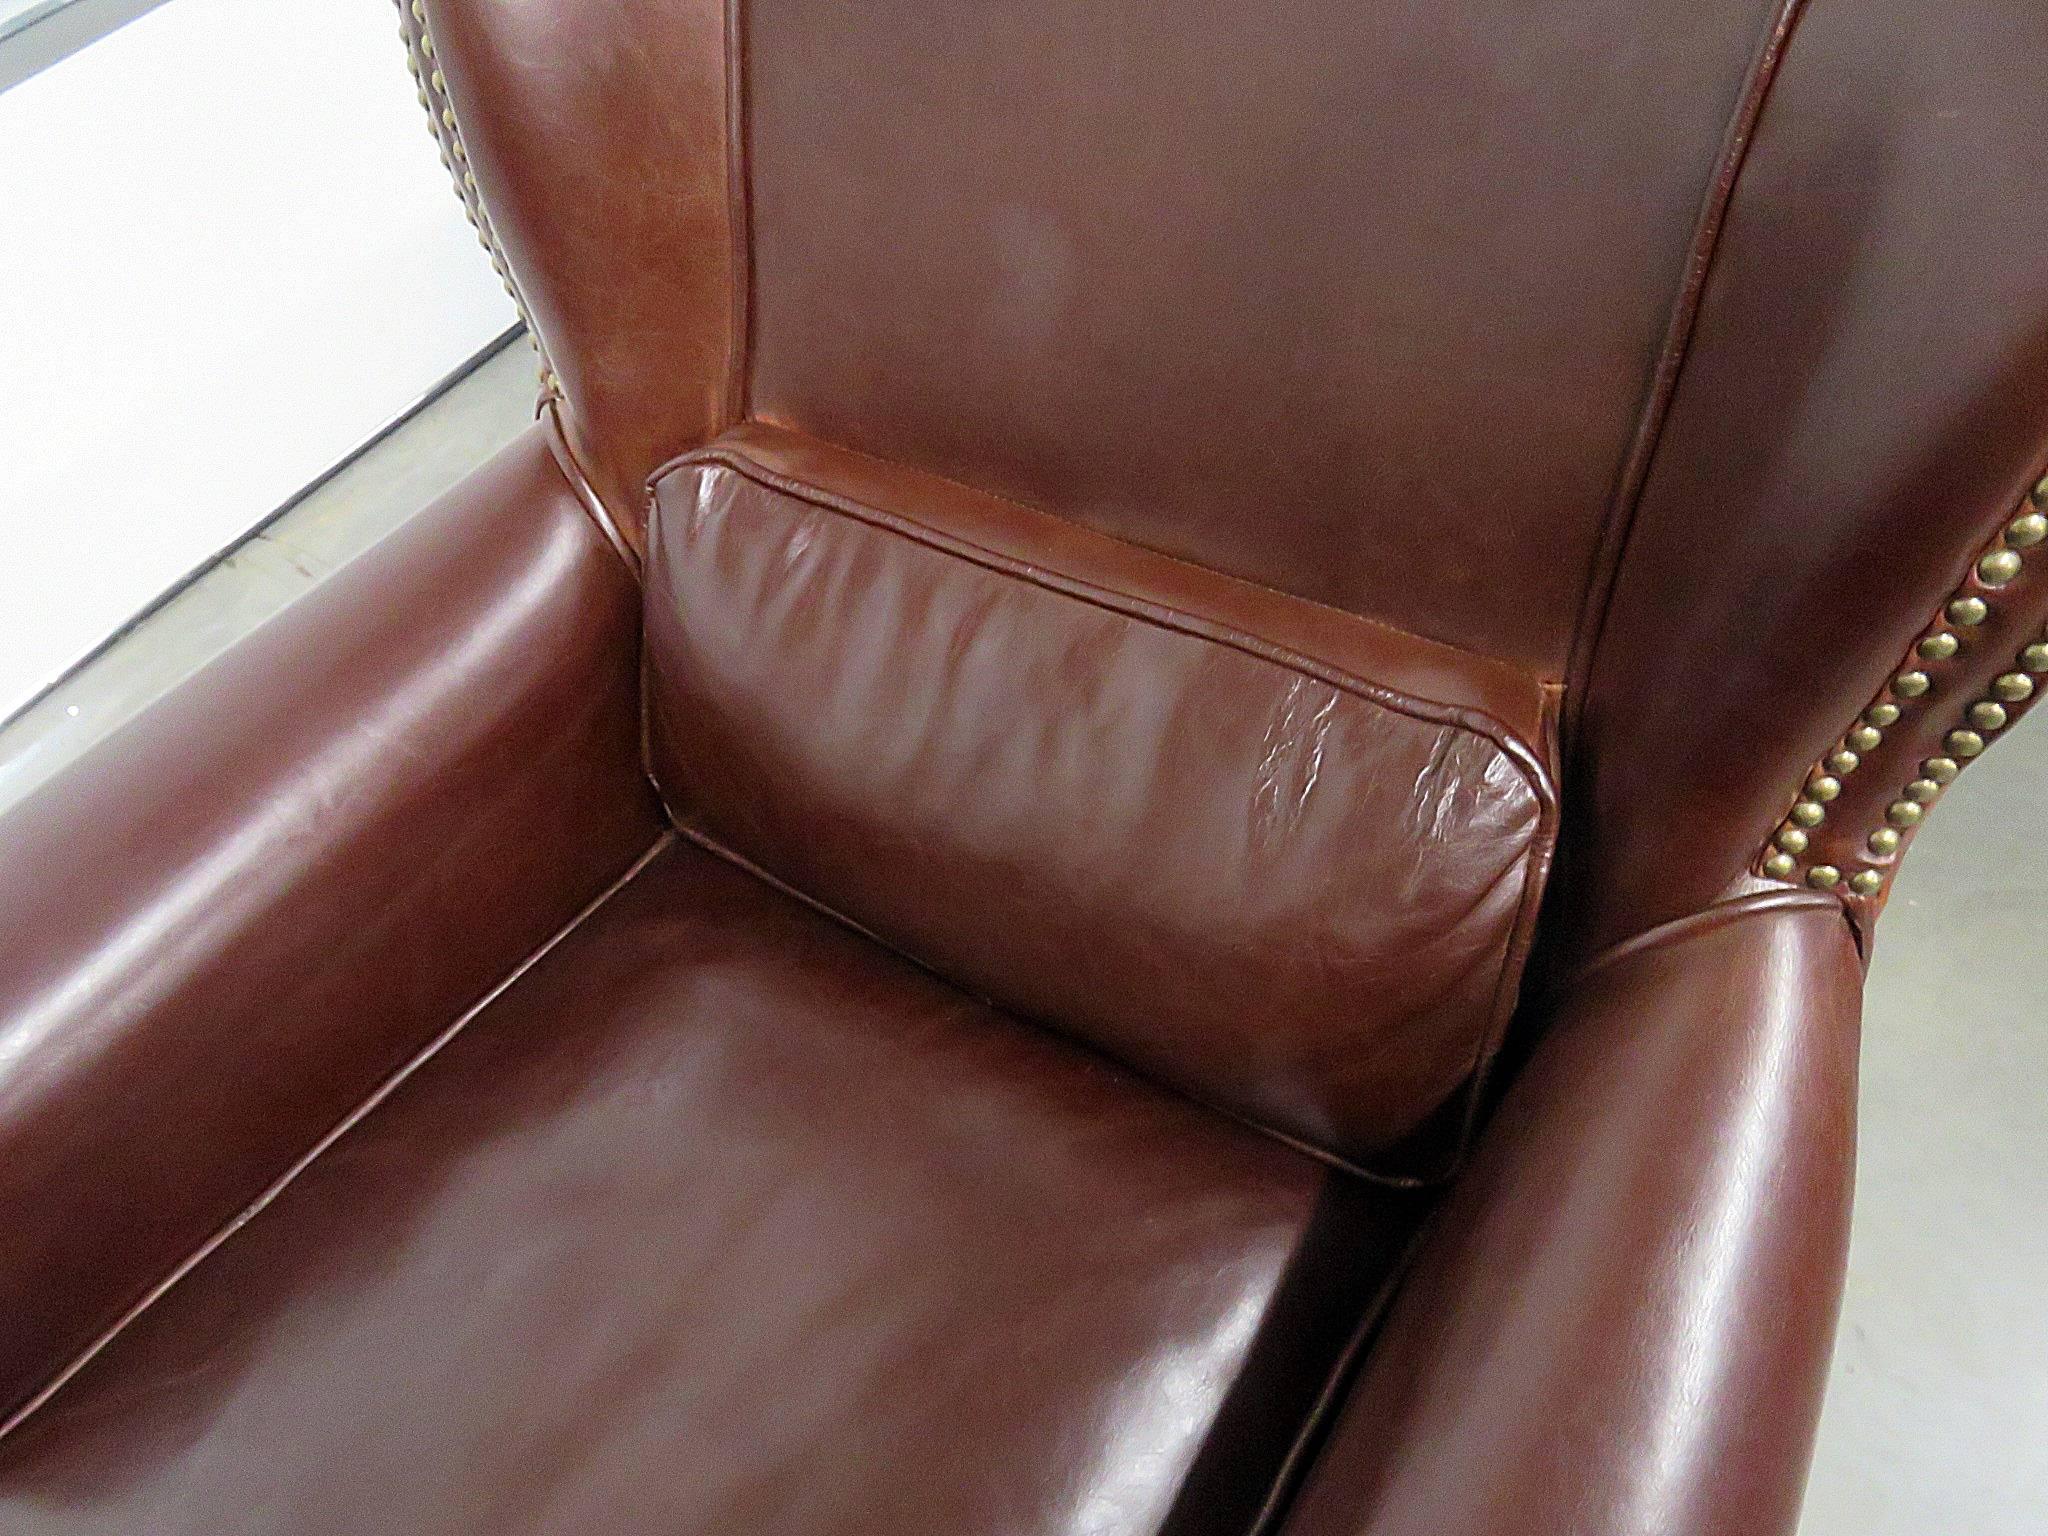 Mid-20th Century Pair of Leather Club Chairs